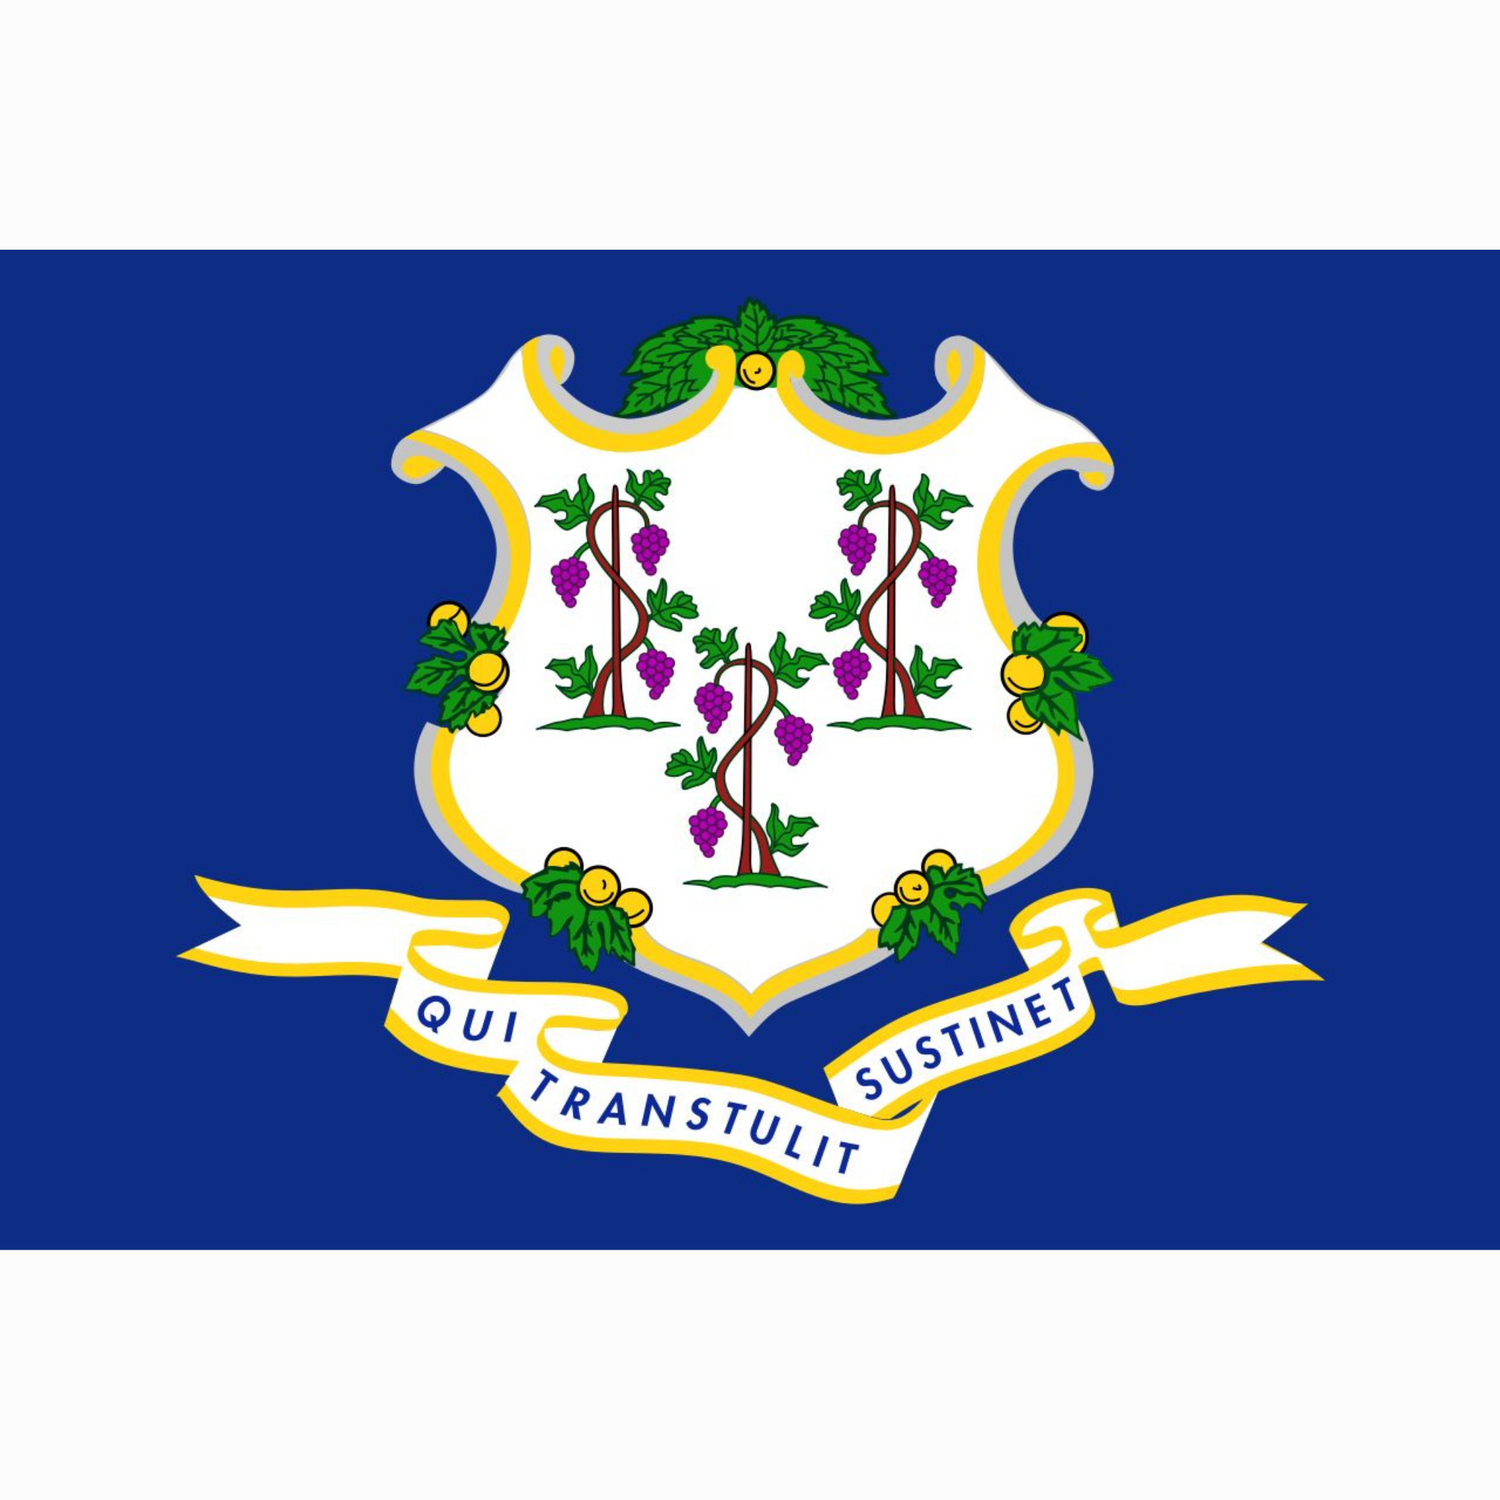 The official state flag of Connecticut was adopted in 1897 and features a field of azure blue with a white shield in the center with three grape vines. - History By Mail